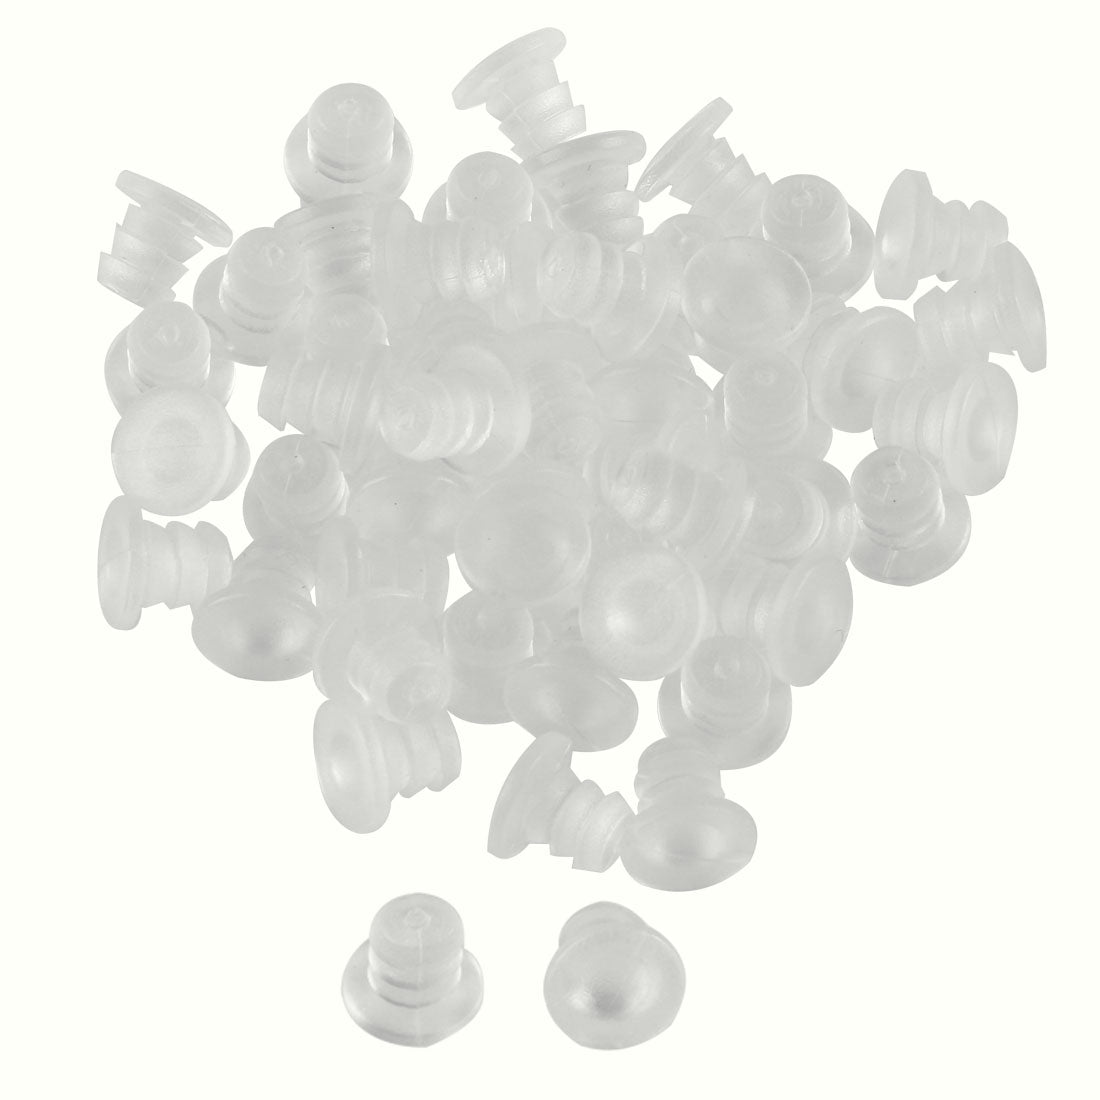 uxcell Uxcell 50pcs 5mm Soft Clear Stem Bumpers Glide, Patio Outdoor Furniture Glass Table Top Anti-collision Embedded